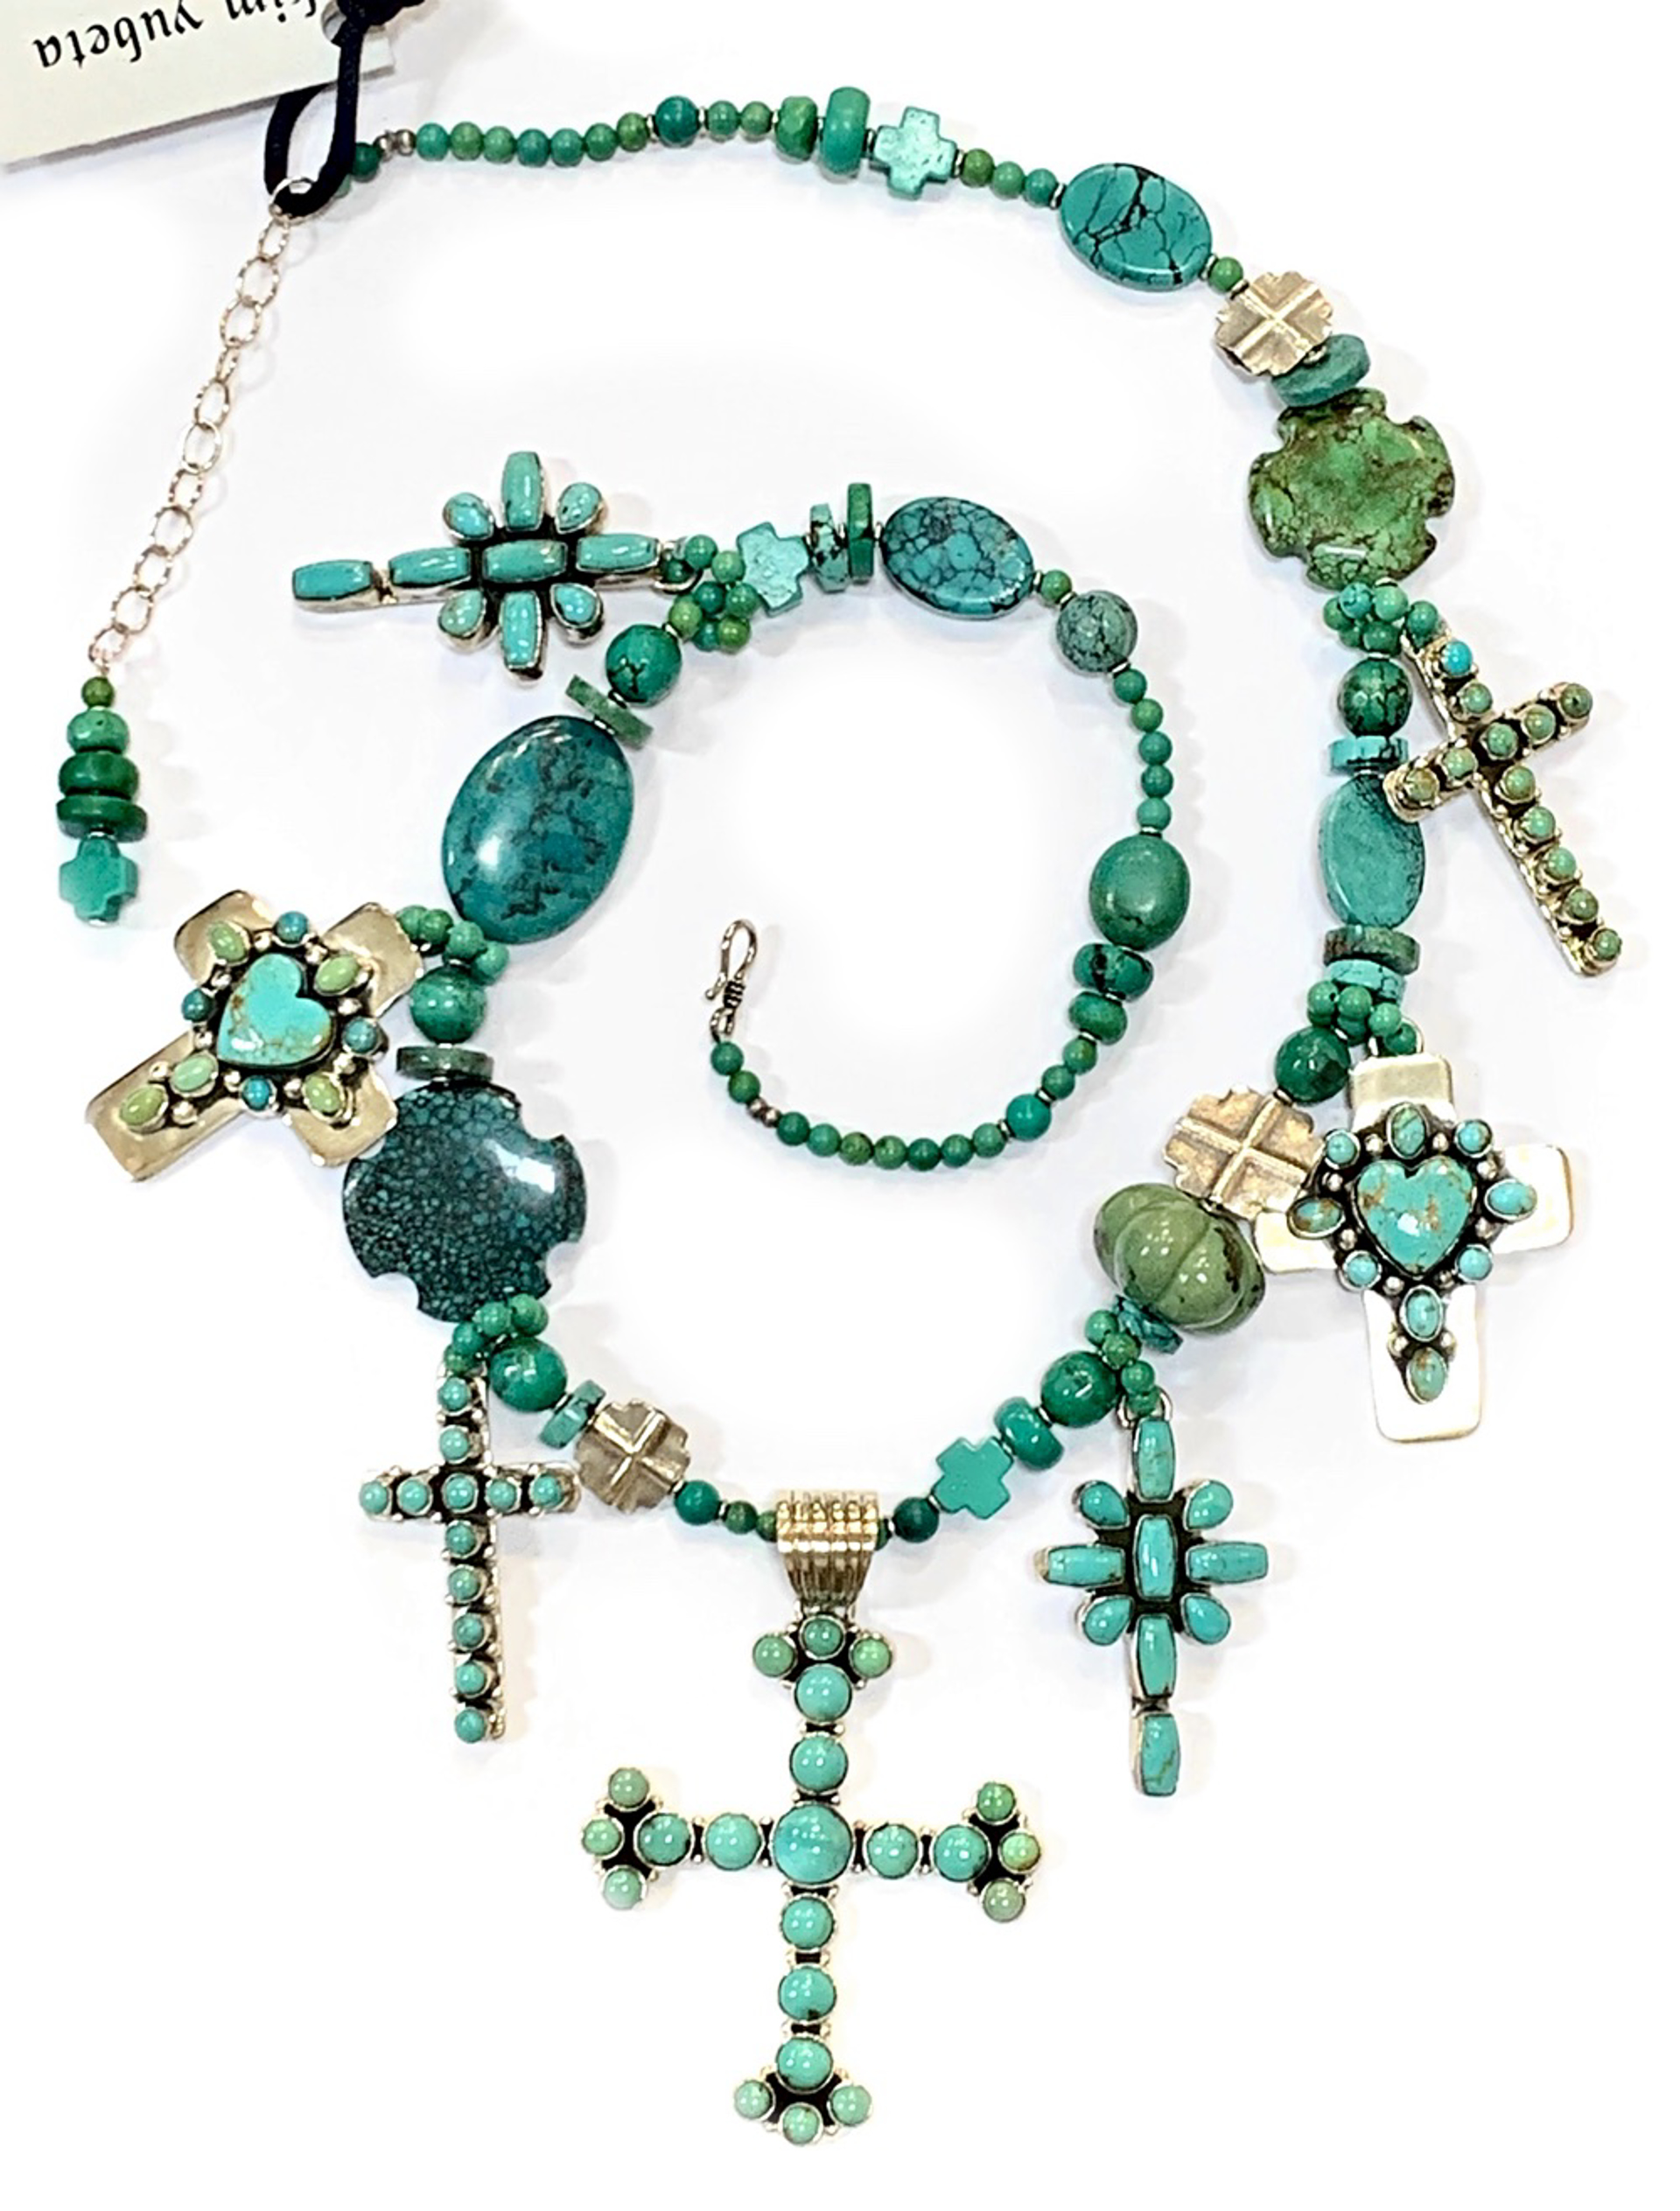 KY 1300 - Turquoise Cross Necklace by Kim Yubeta